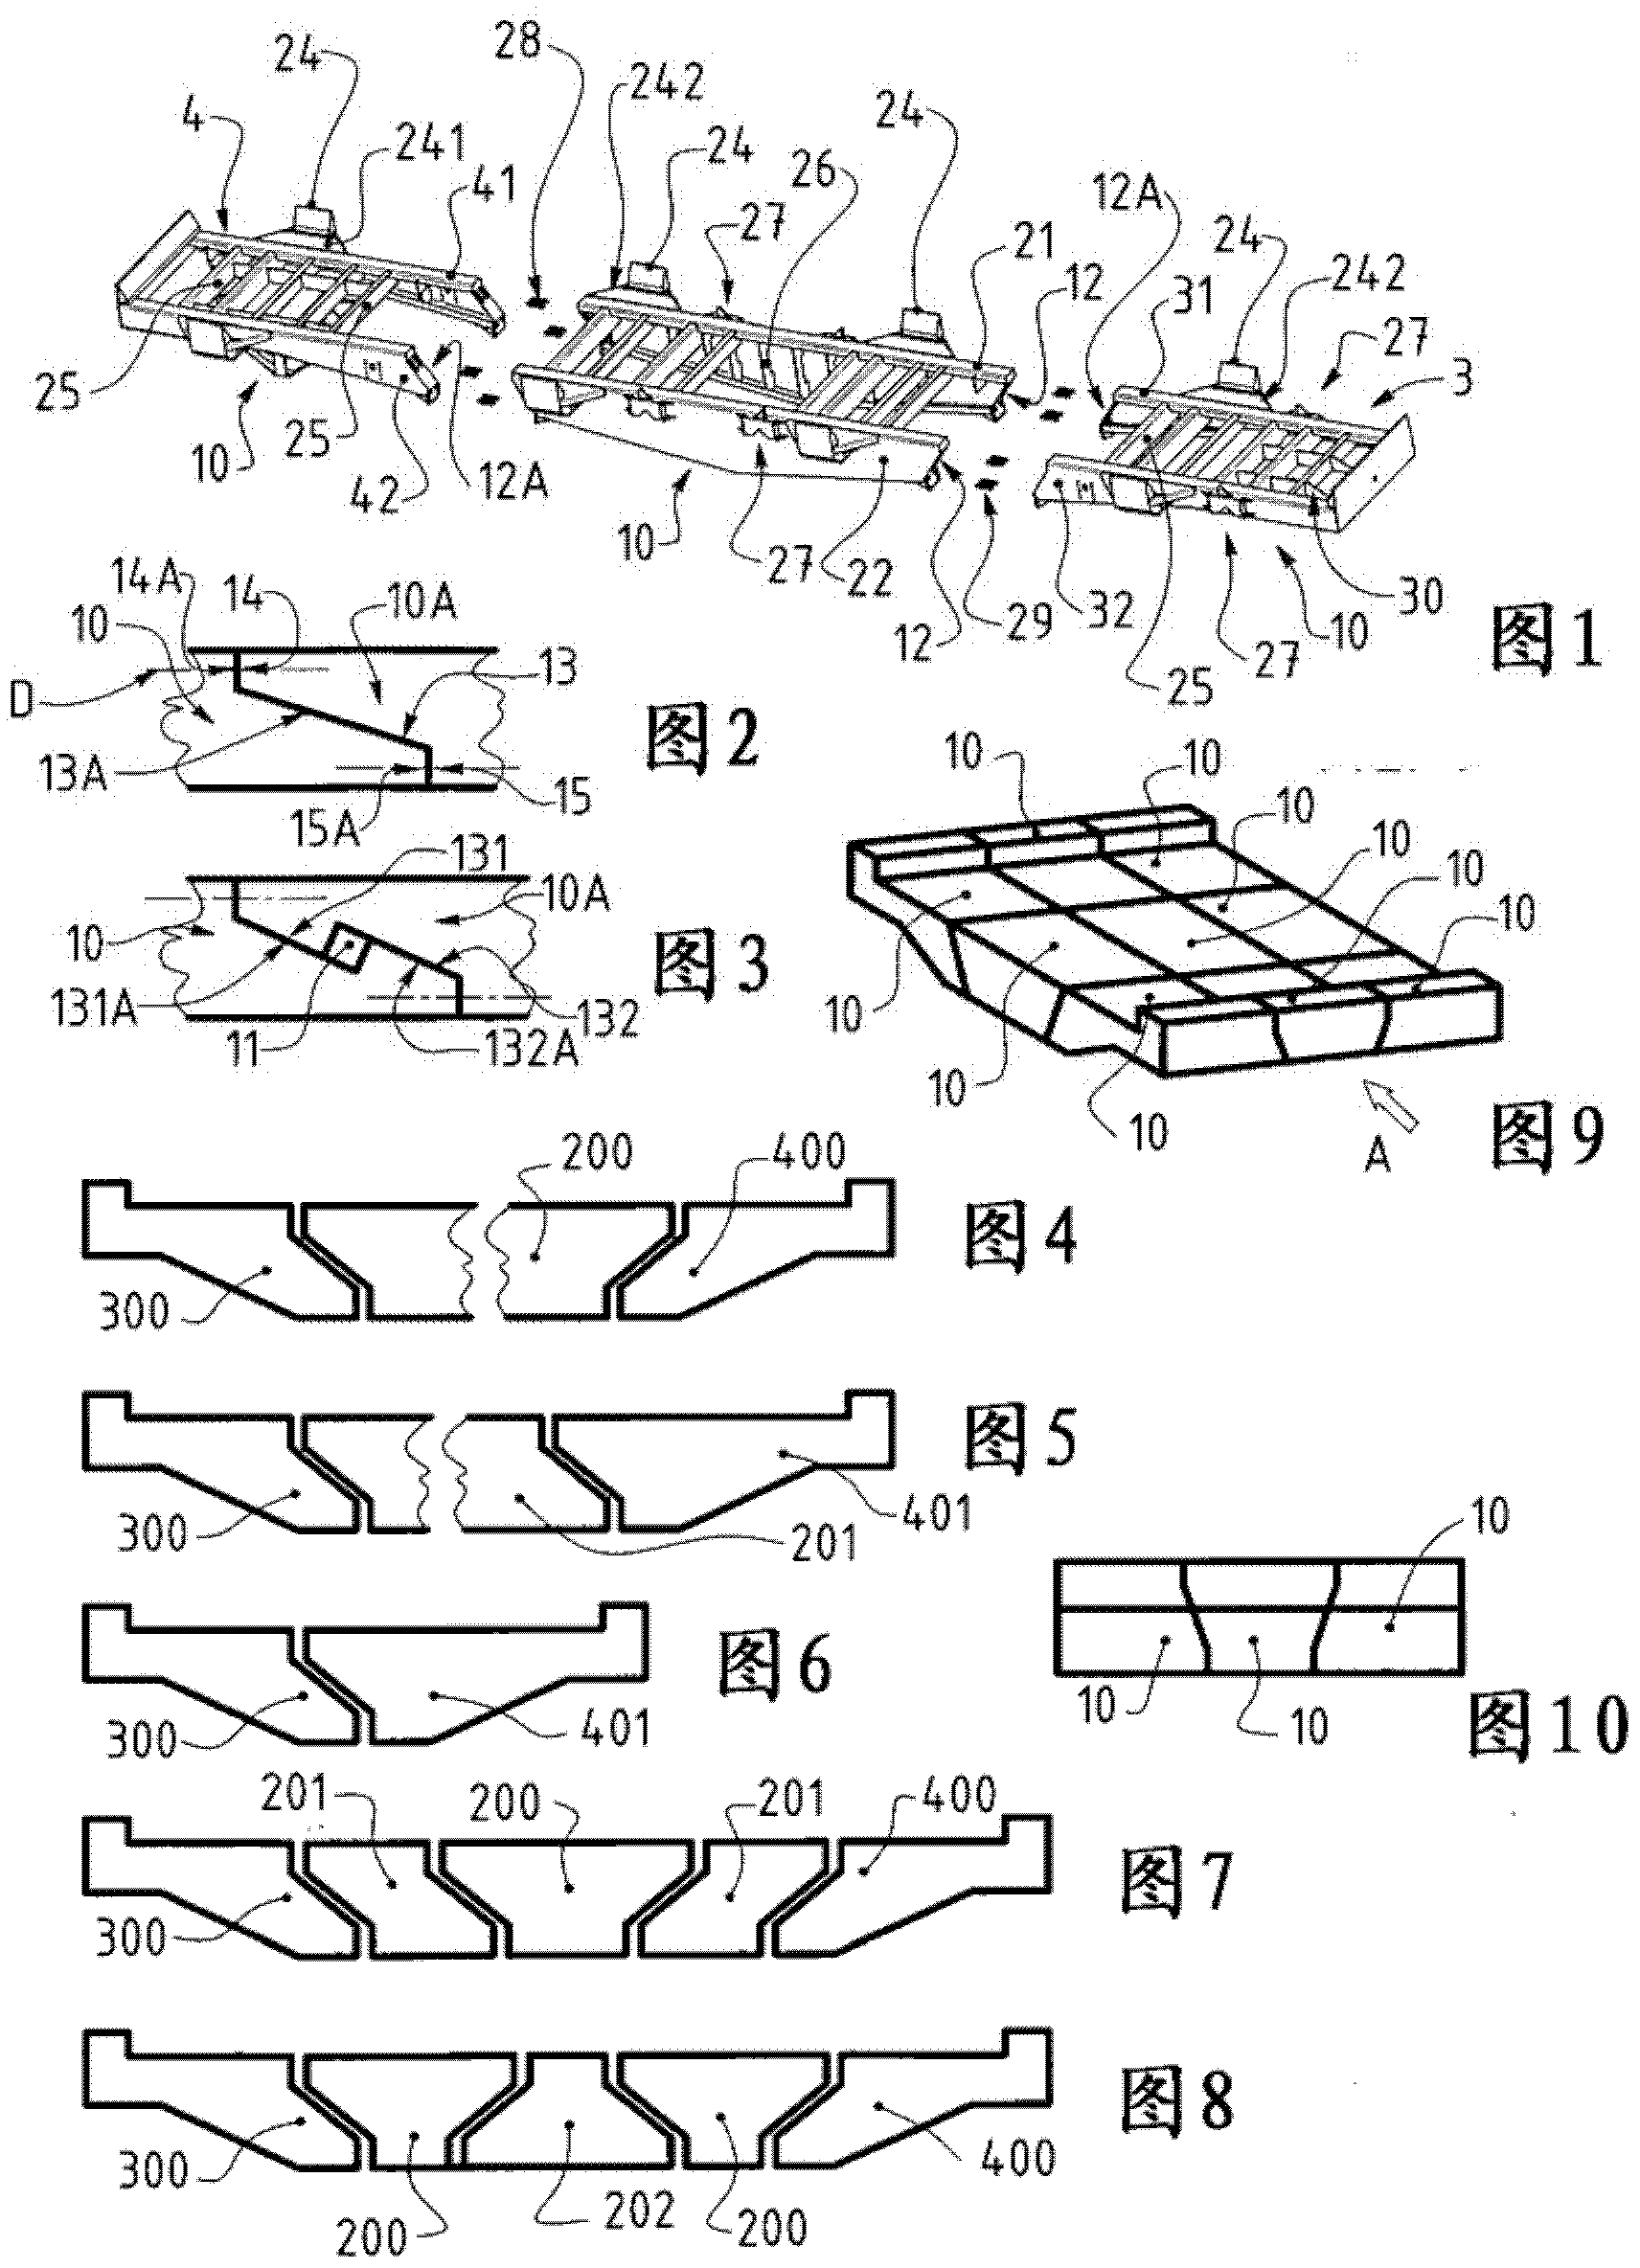 Module for the modular frame of a heavy load transport vehicle